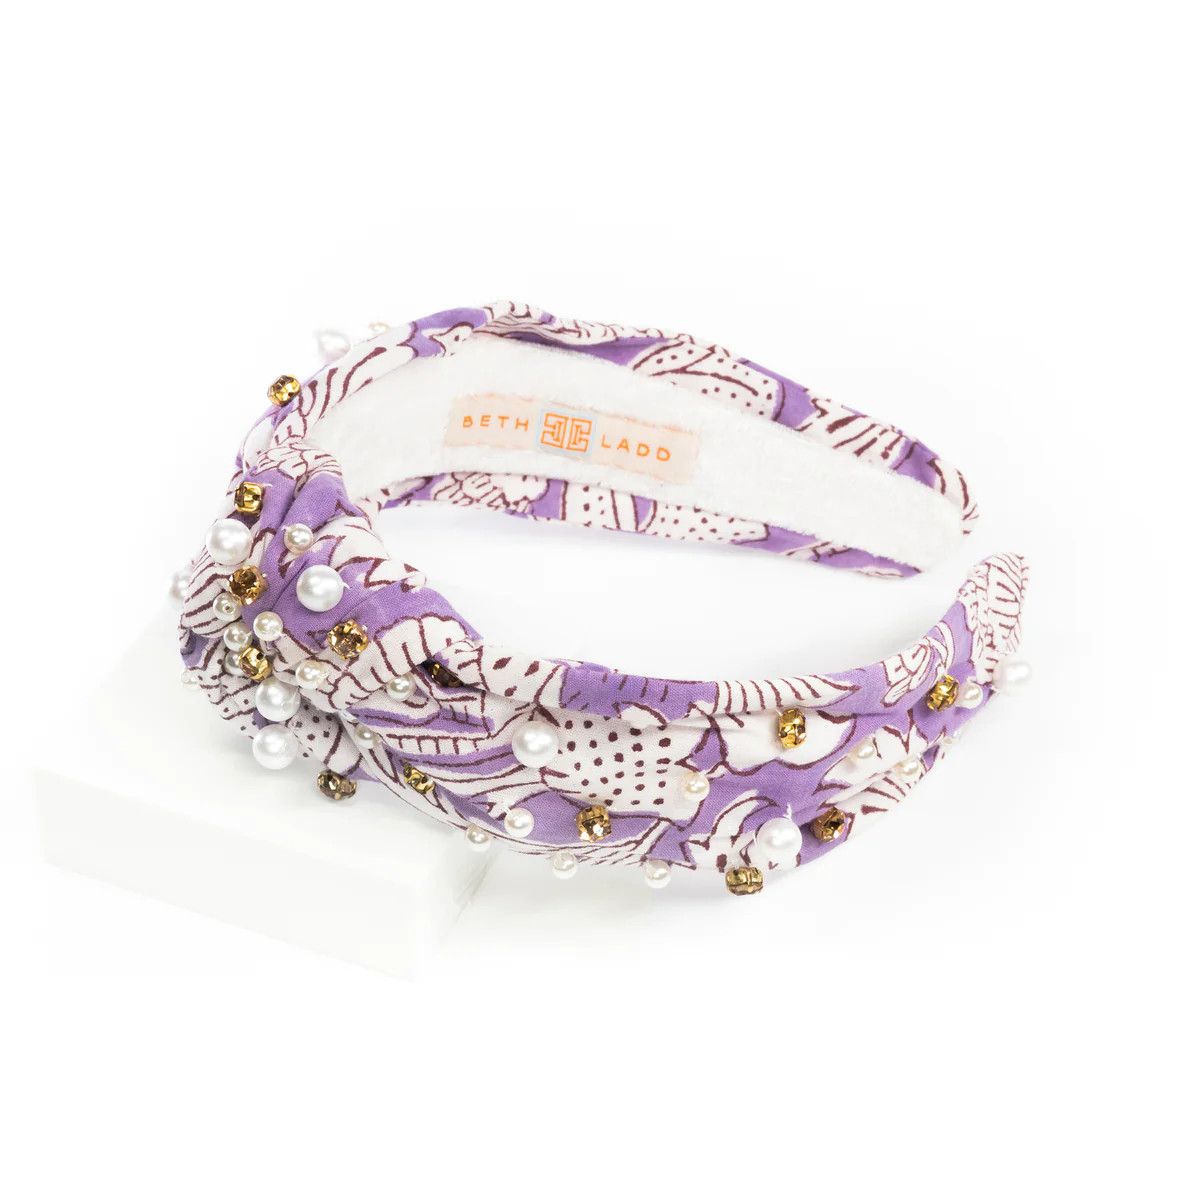 Block Print Headband with Gems in London Lilac | Beth Ladd Collections